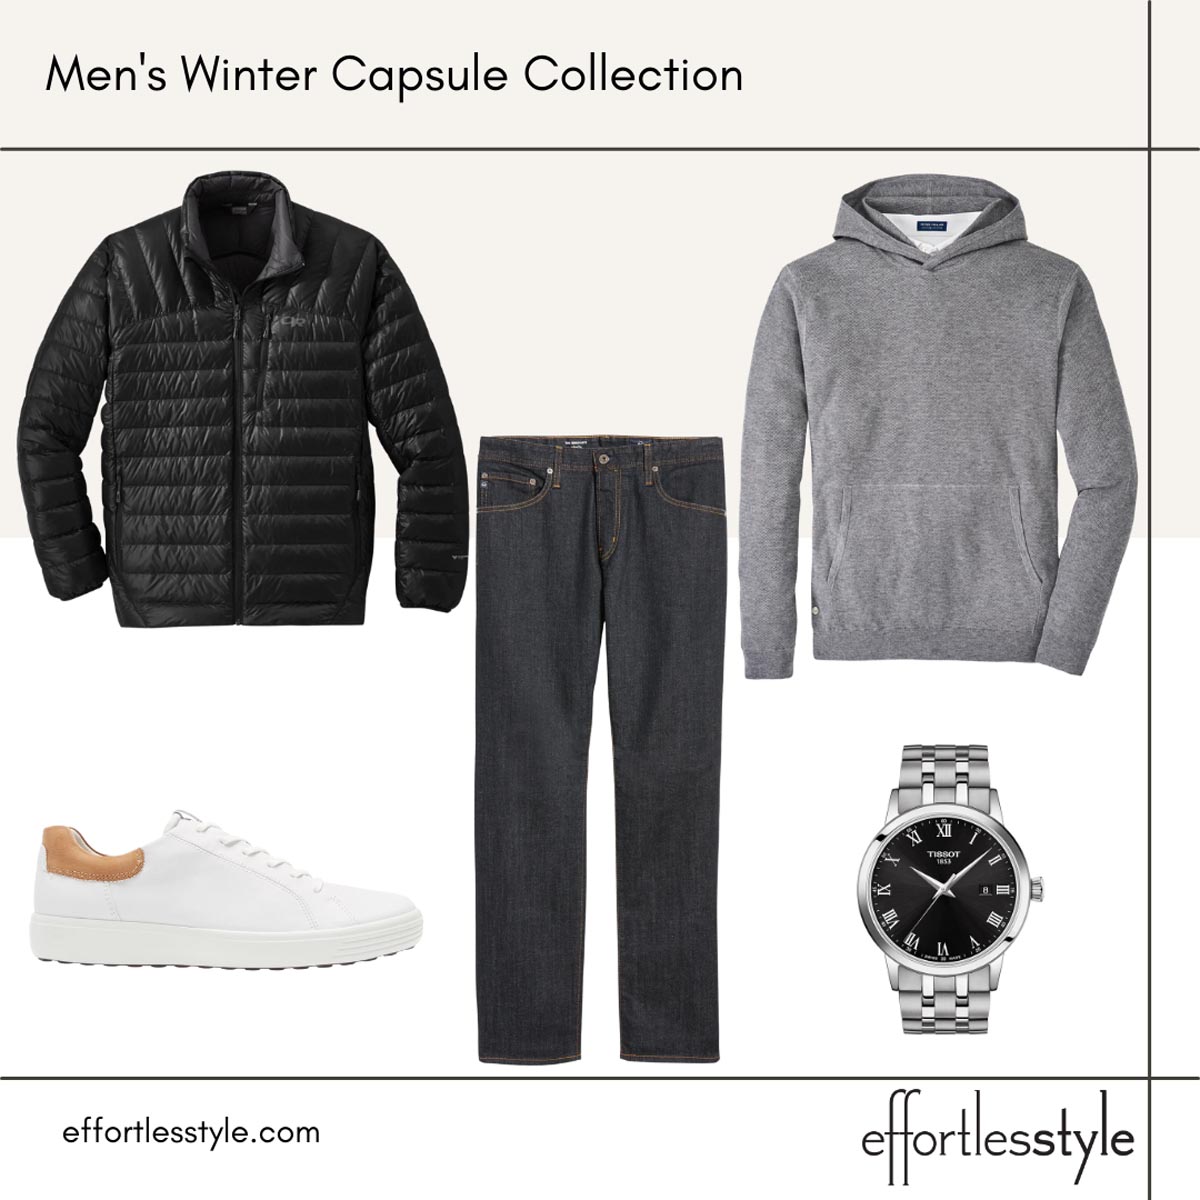 Men's Winter Capsule Collection Styled Looks hoodie how to wear a hoodie hoodie looks for guys men's hoodie outfits how to wear a hoodie with jeans Jeans and sneakers for guys